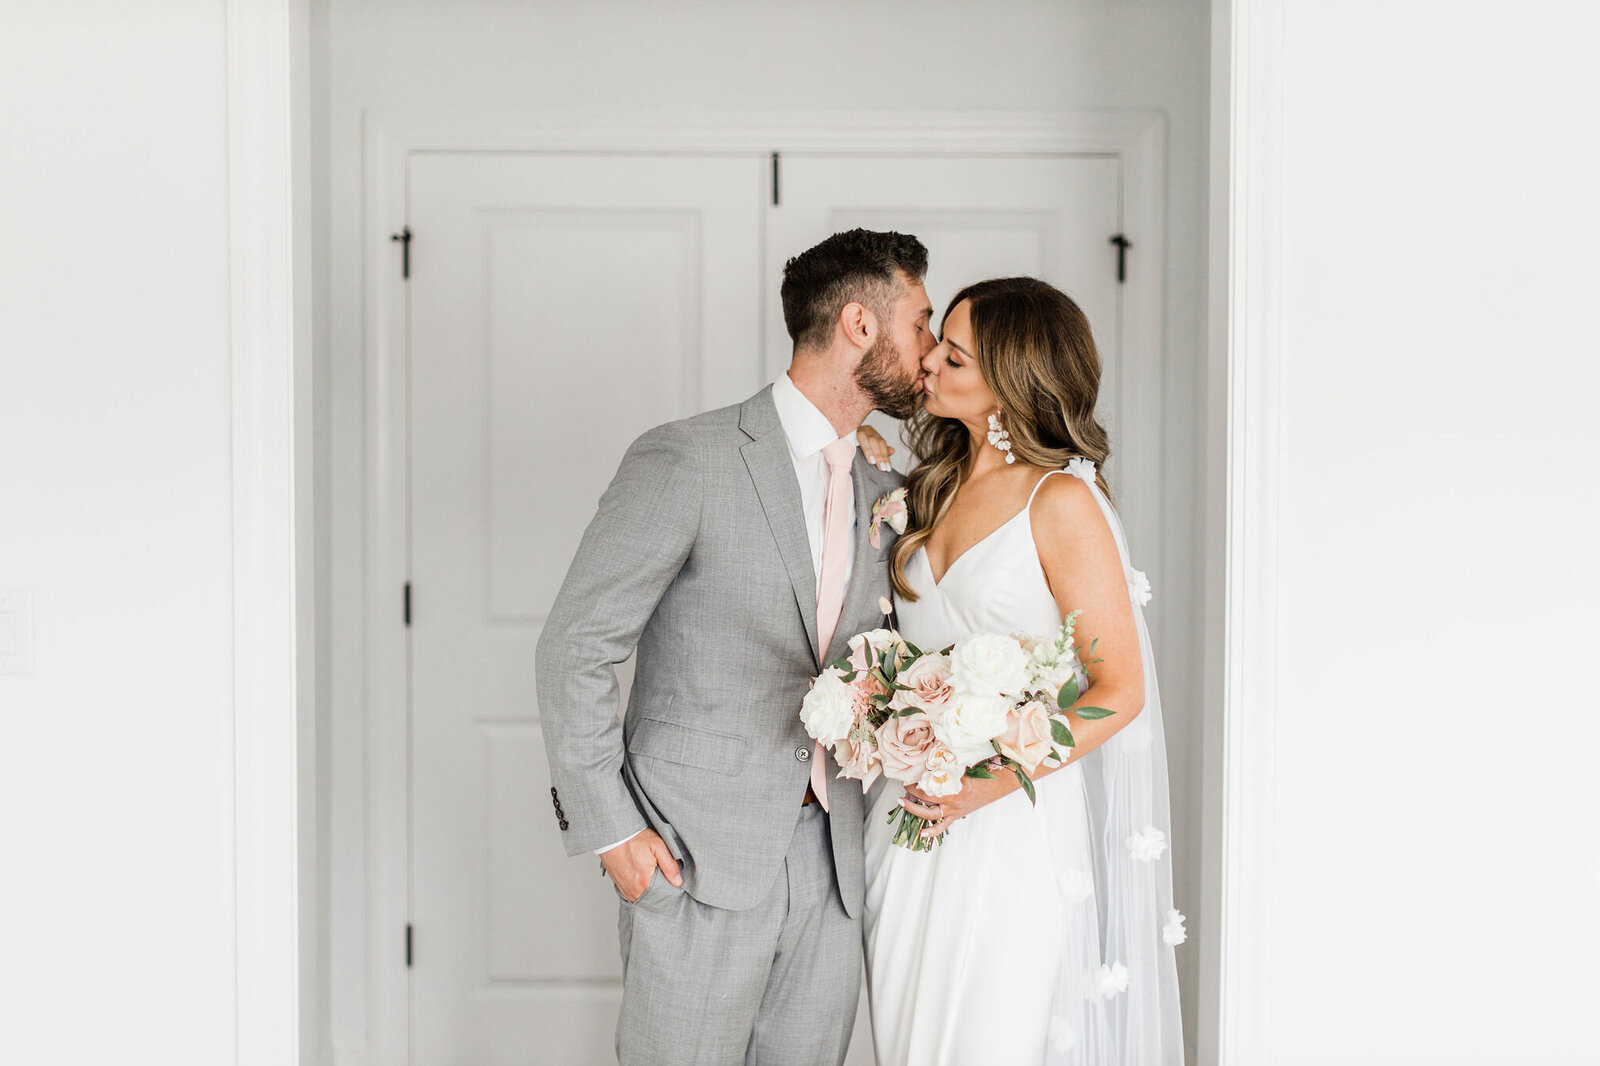 Kissing Wedding Photo | Raleigh NC | The Axtells Photo and Film